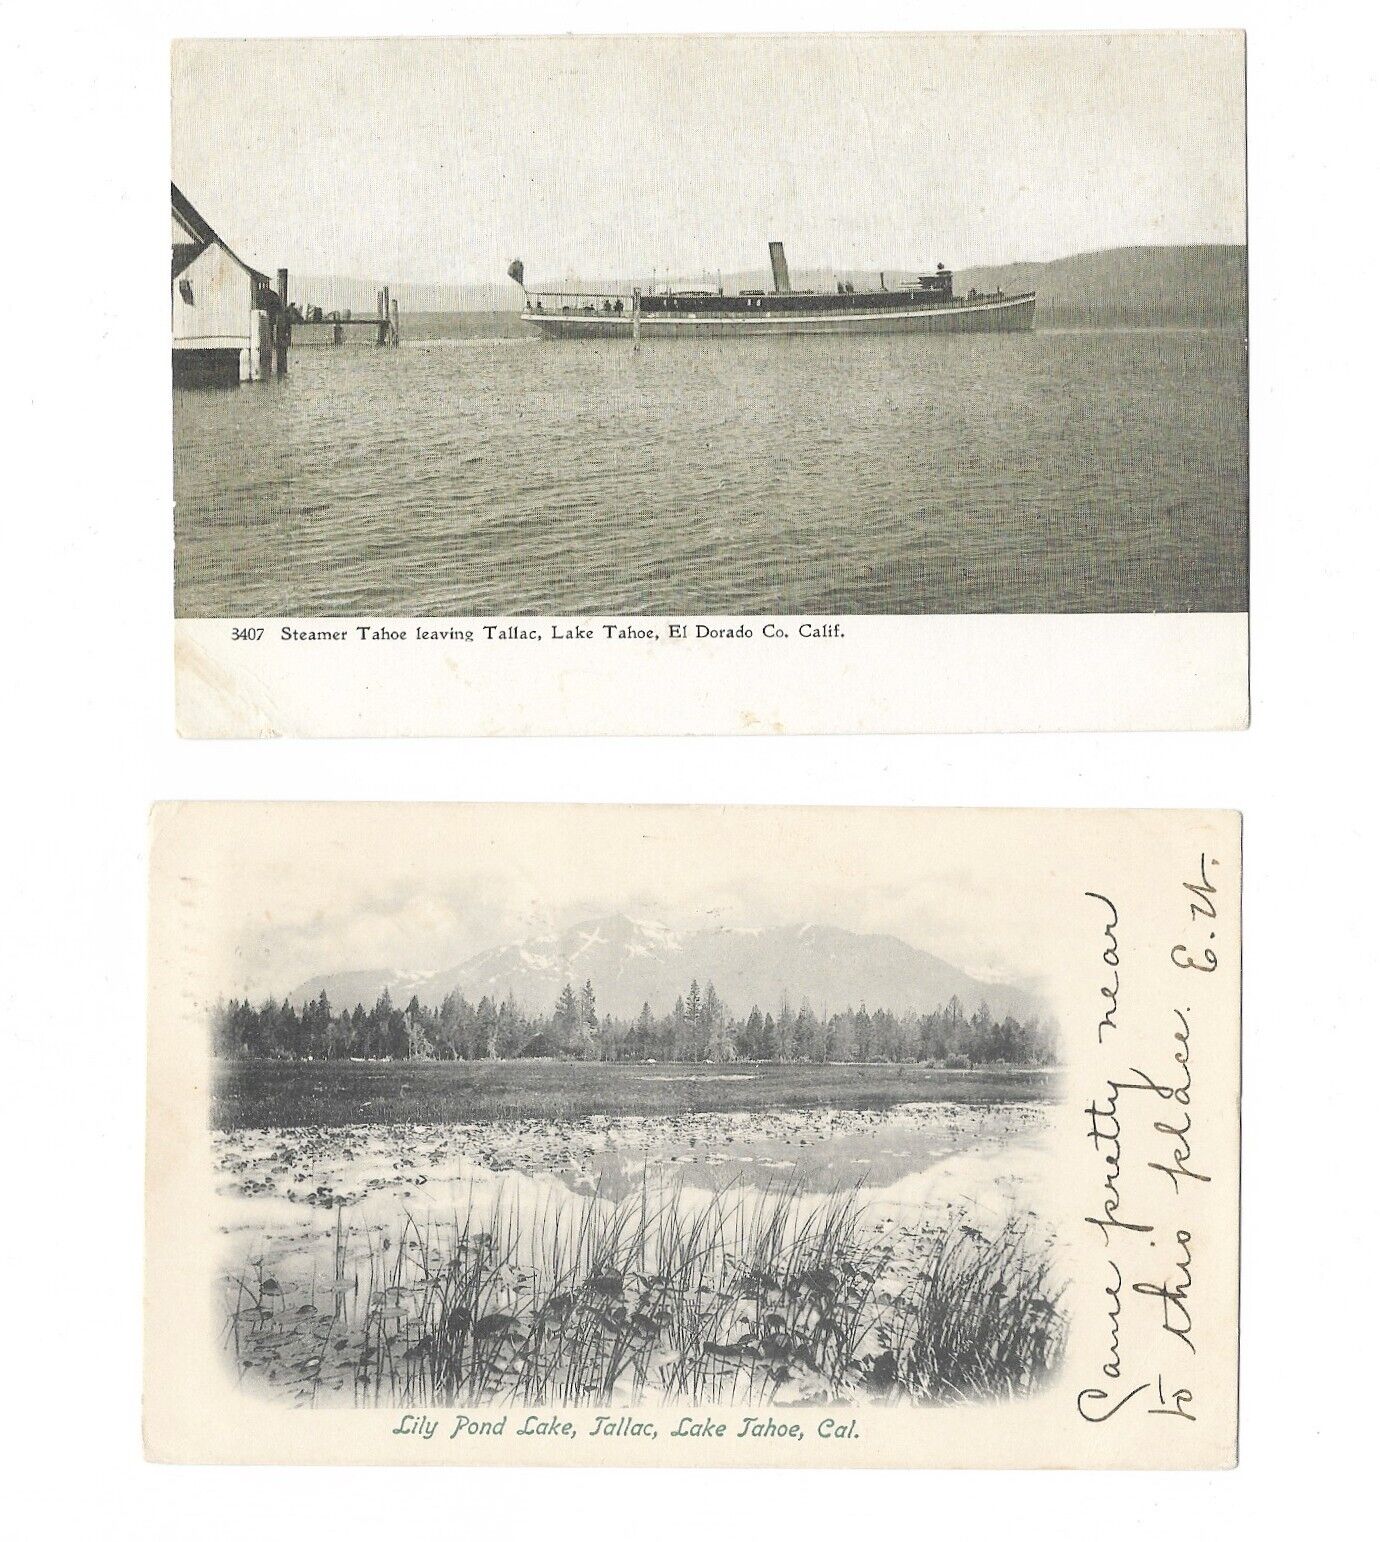 RARE & EARLY Lake Tahoe, California Postcards (Tallac, Steamer) incl Pioneer PMC